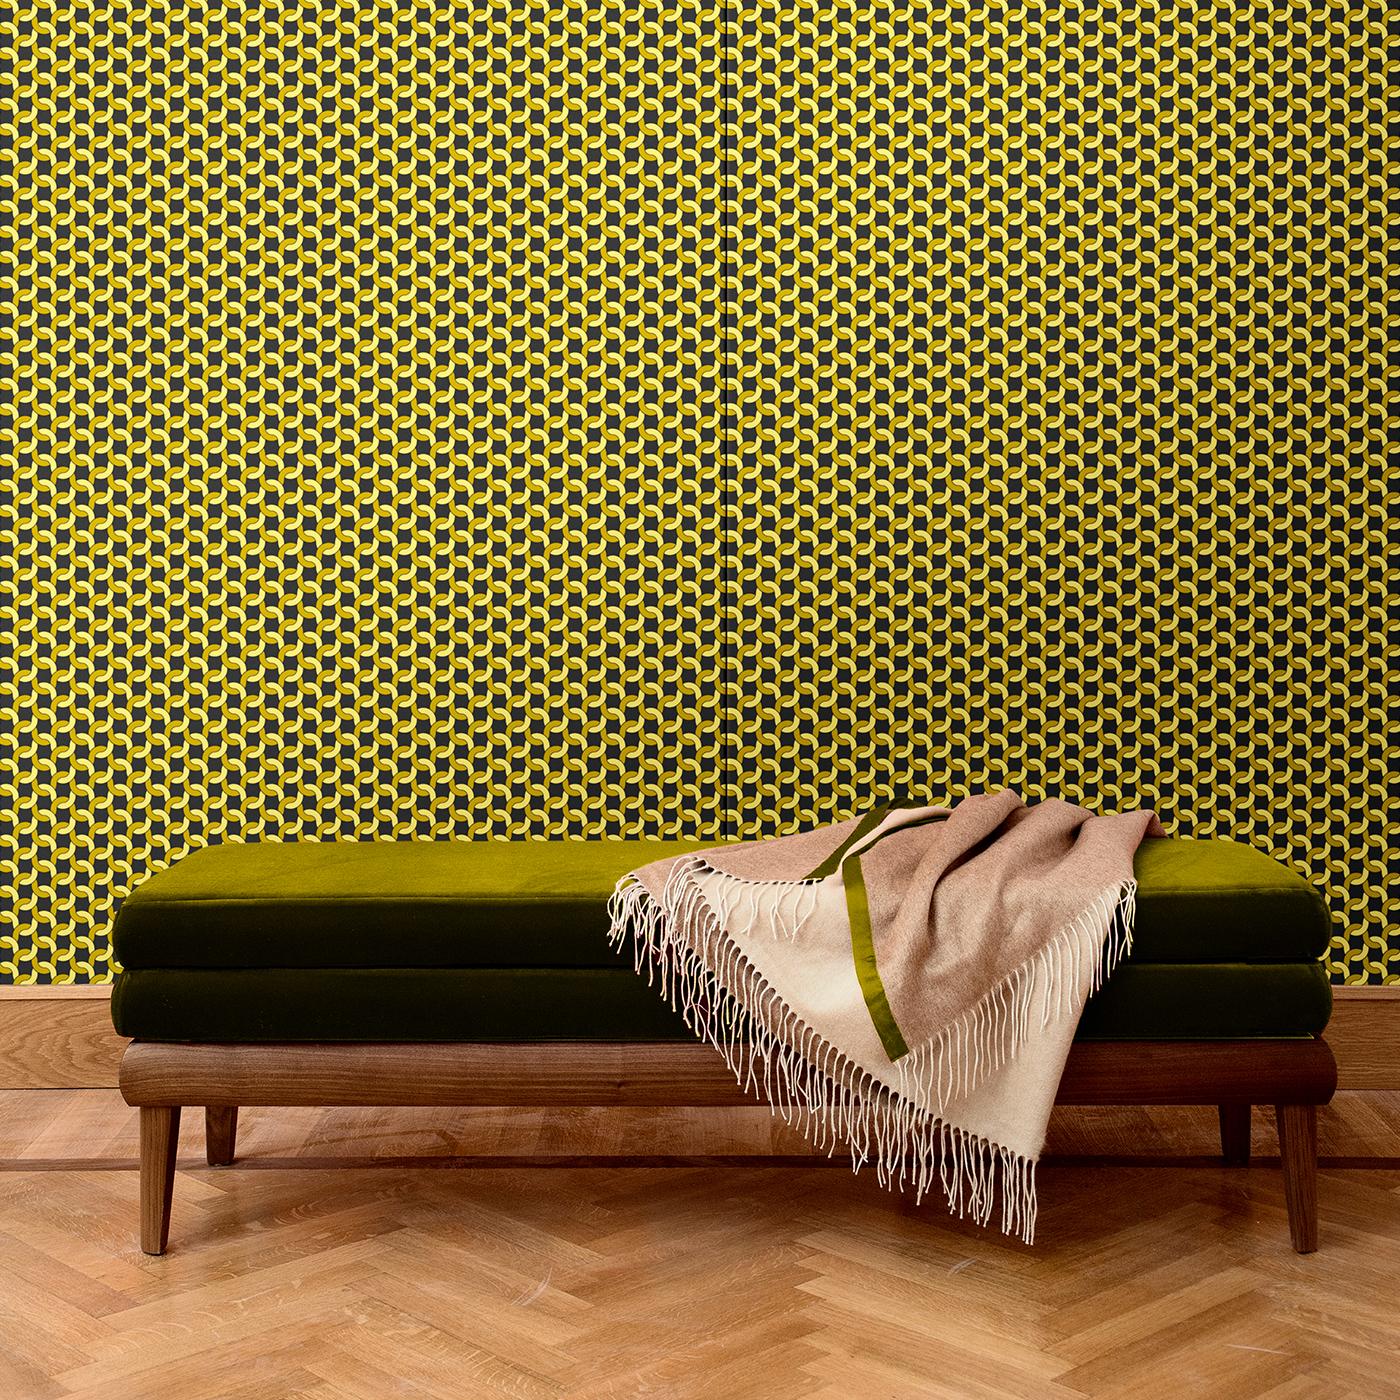 Mesmerizing and sophisticated, this wall covering will infuse with elegance whole rooms or as accents. Its abstract and repetitive motif creates a textural decoration that will not go unnoticed. Part of the Geometric collection, it was crafted of